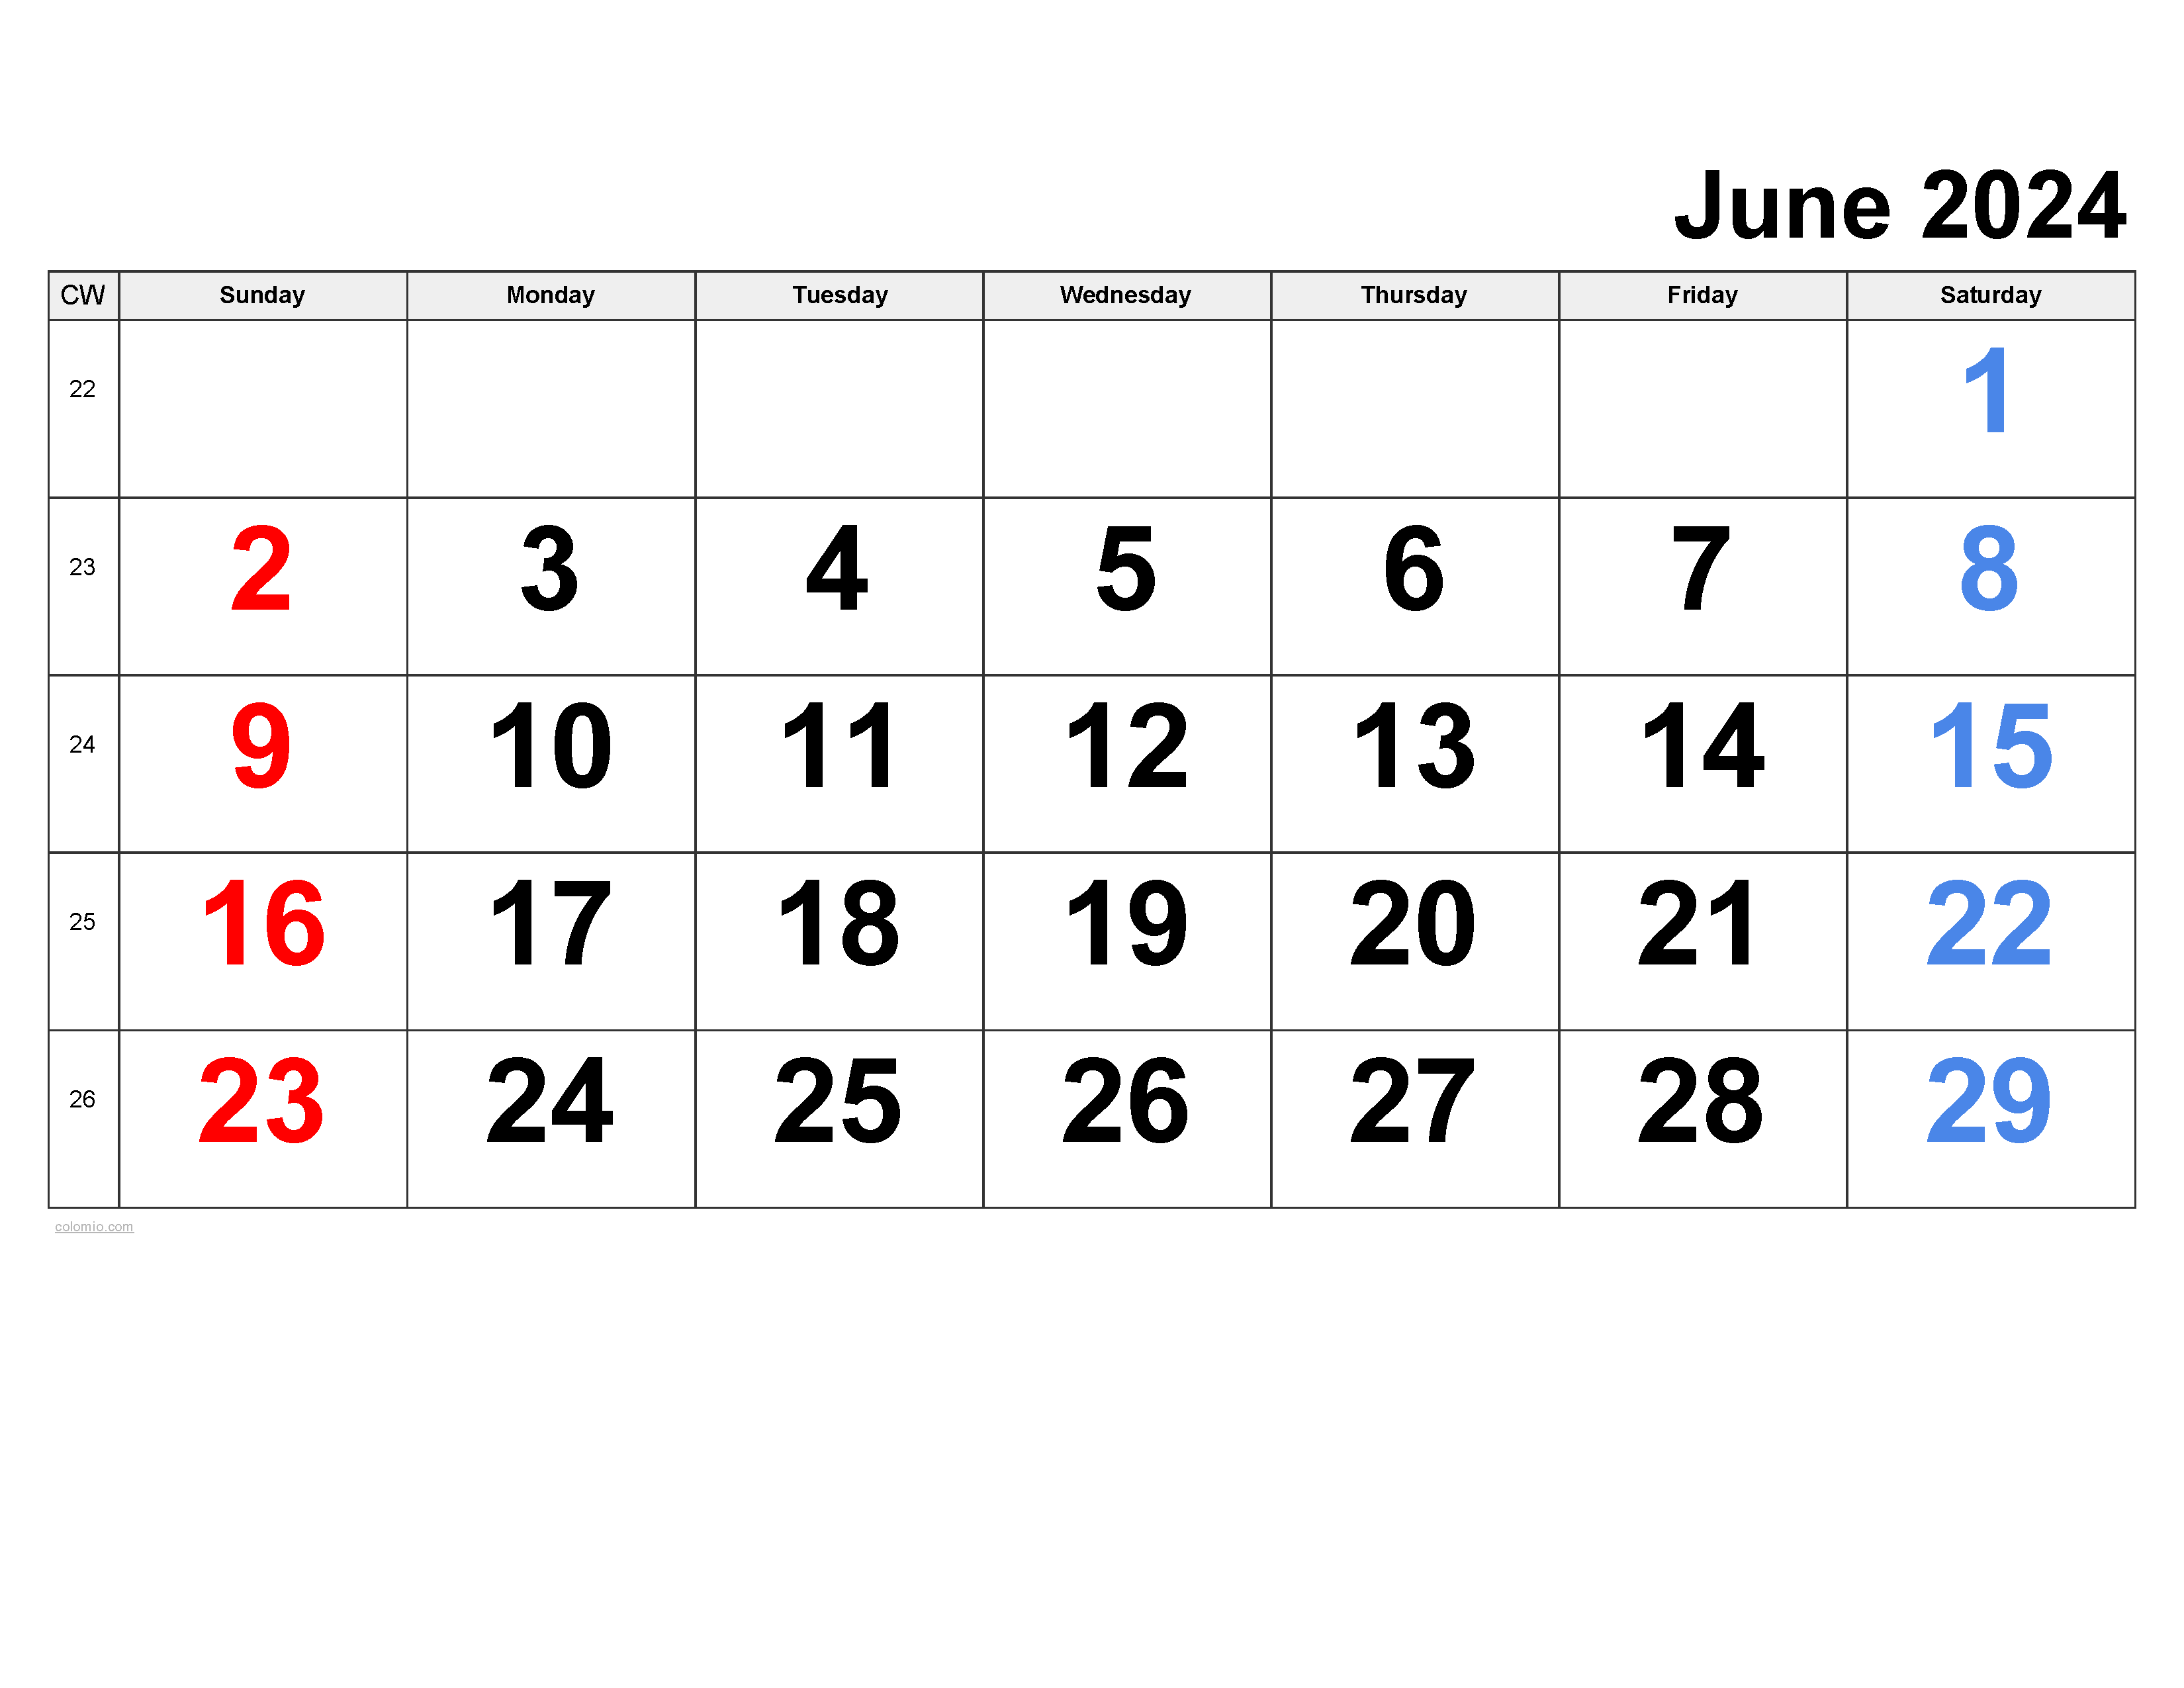 June 2024 Calendar | Free Printable Pdf, Xls And Png pertaining to What Number Is June On The Calendar 2024